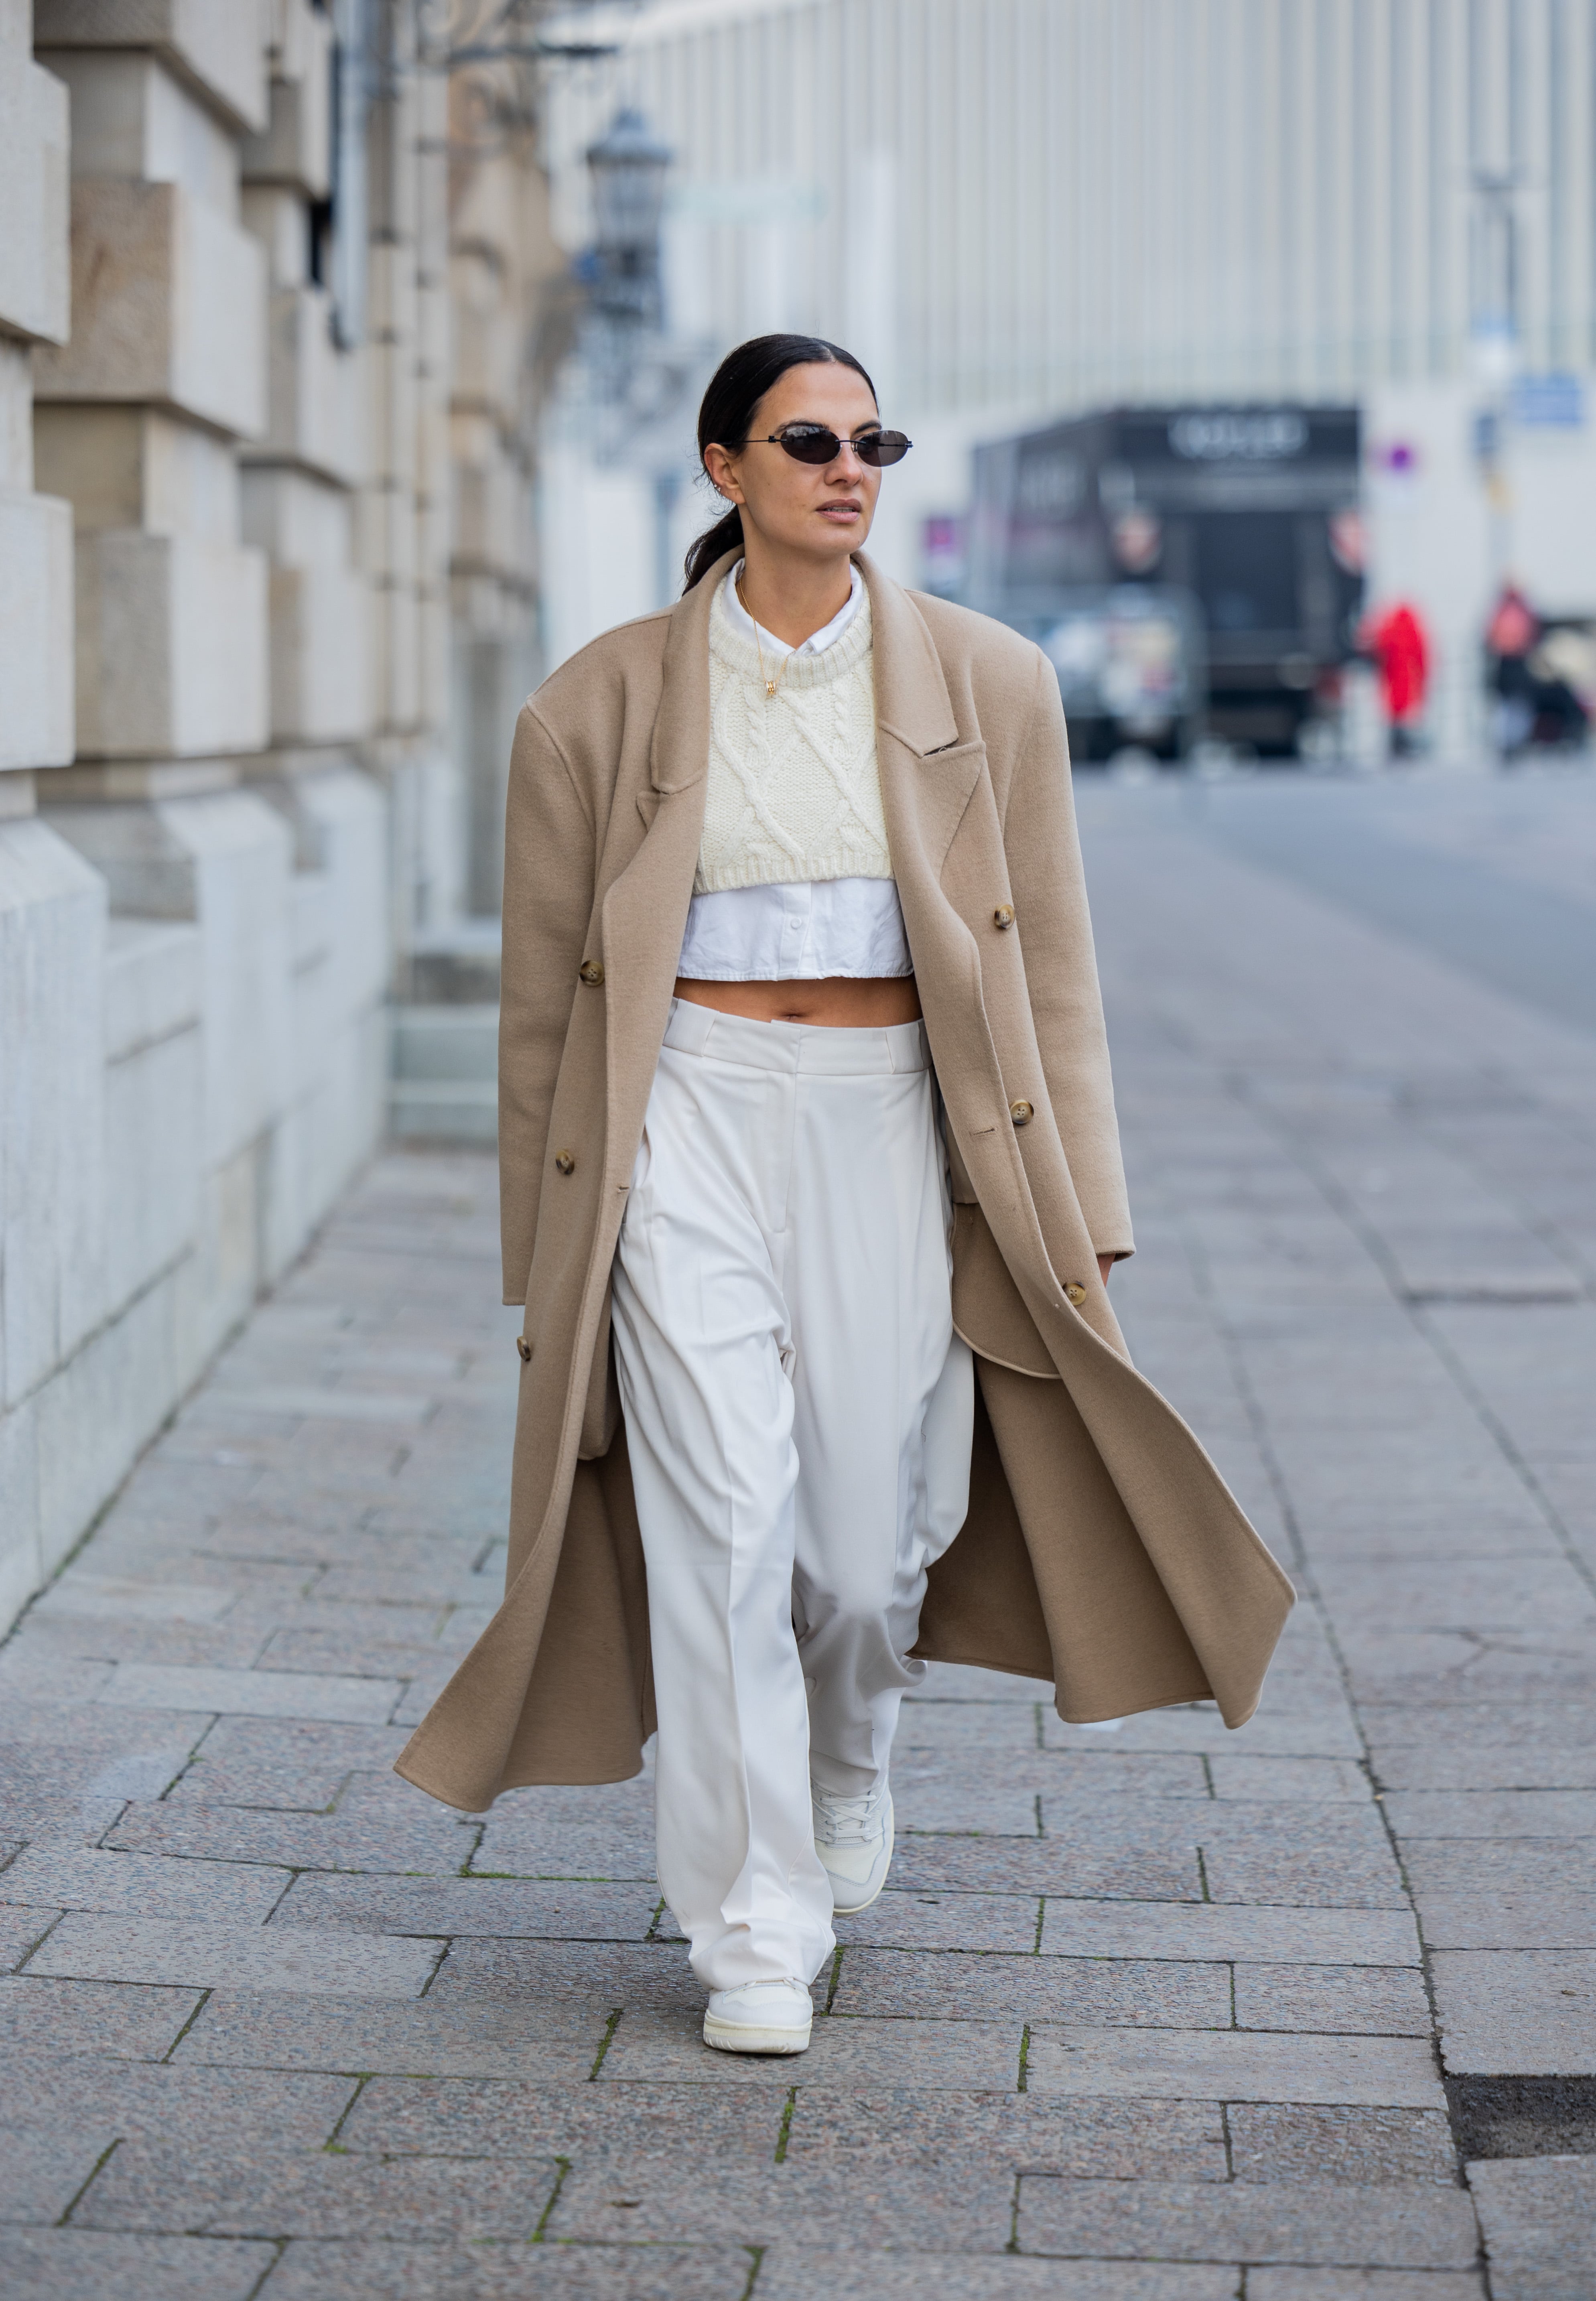 All White Party Outfit Ideas For Women: Street Style Inspiration 2019